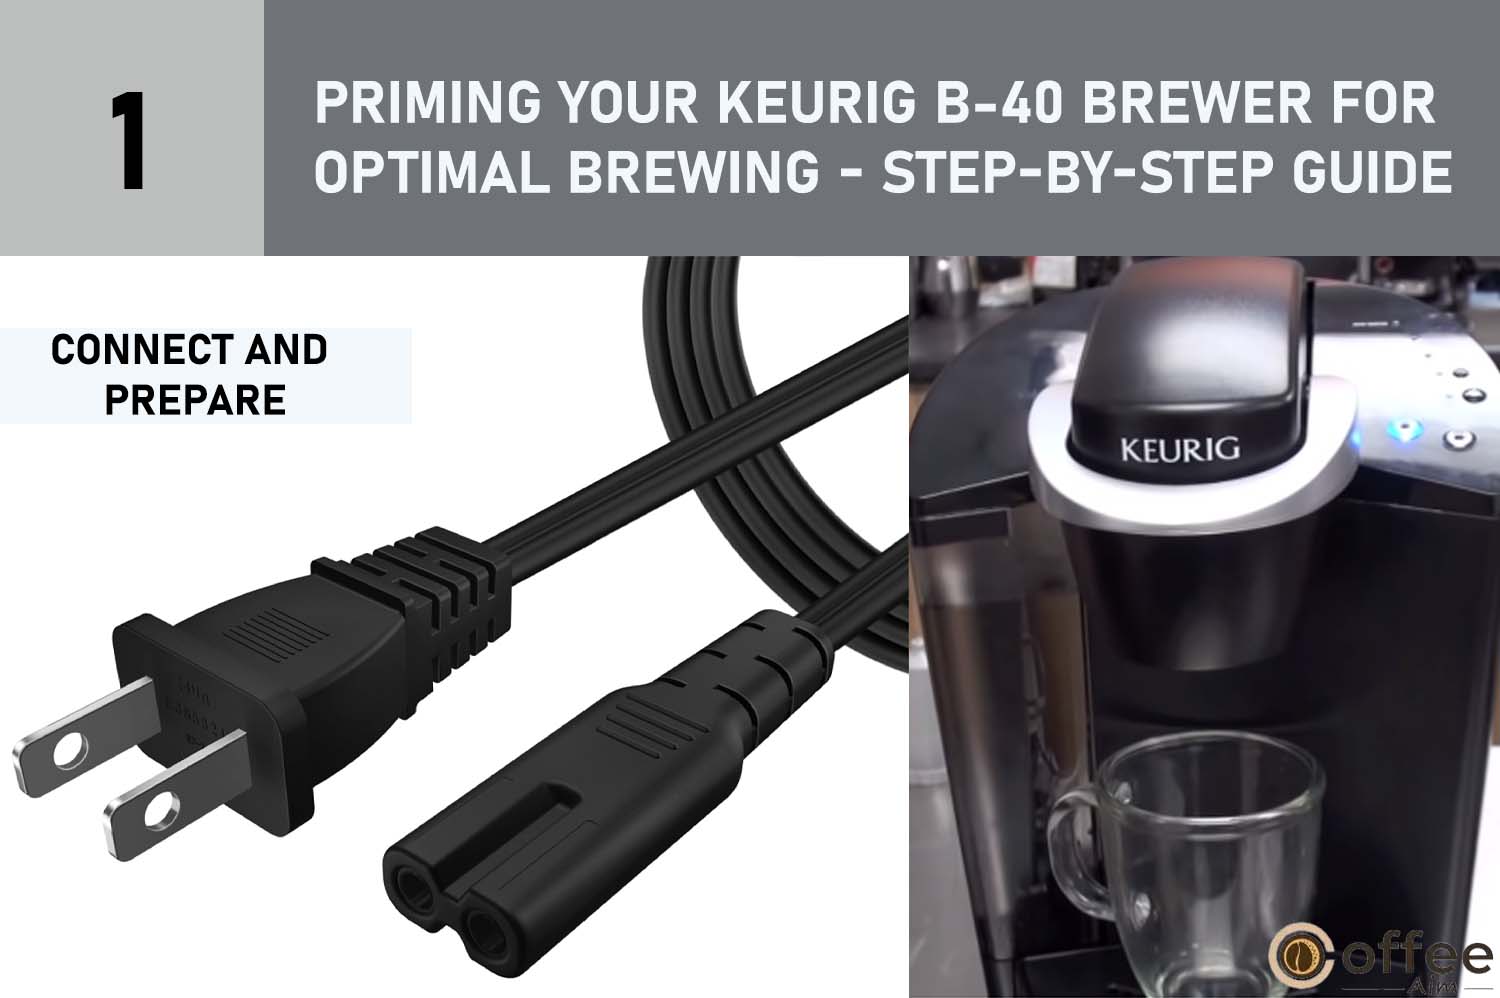 This illustrative image encapsulates the concept of "Connect and Prepare," aligning perfectly with the heading "Priming Your Keurig B-40 Brewer for Optimal Brewing - Step-by-Step Guide" for the comprehensive article on "How to Use Keurig B-40."